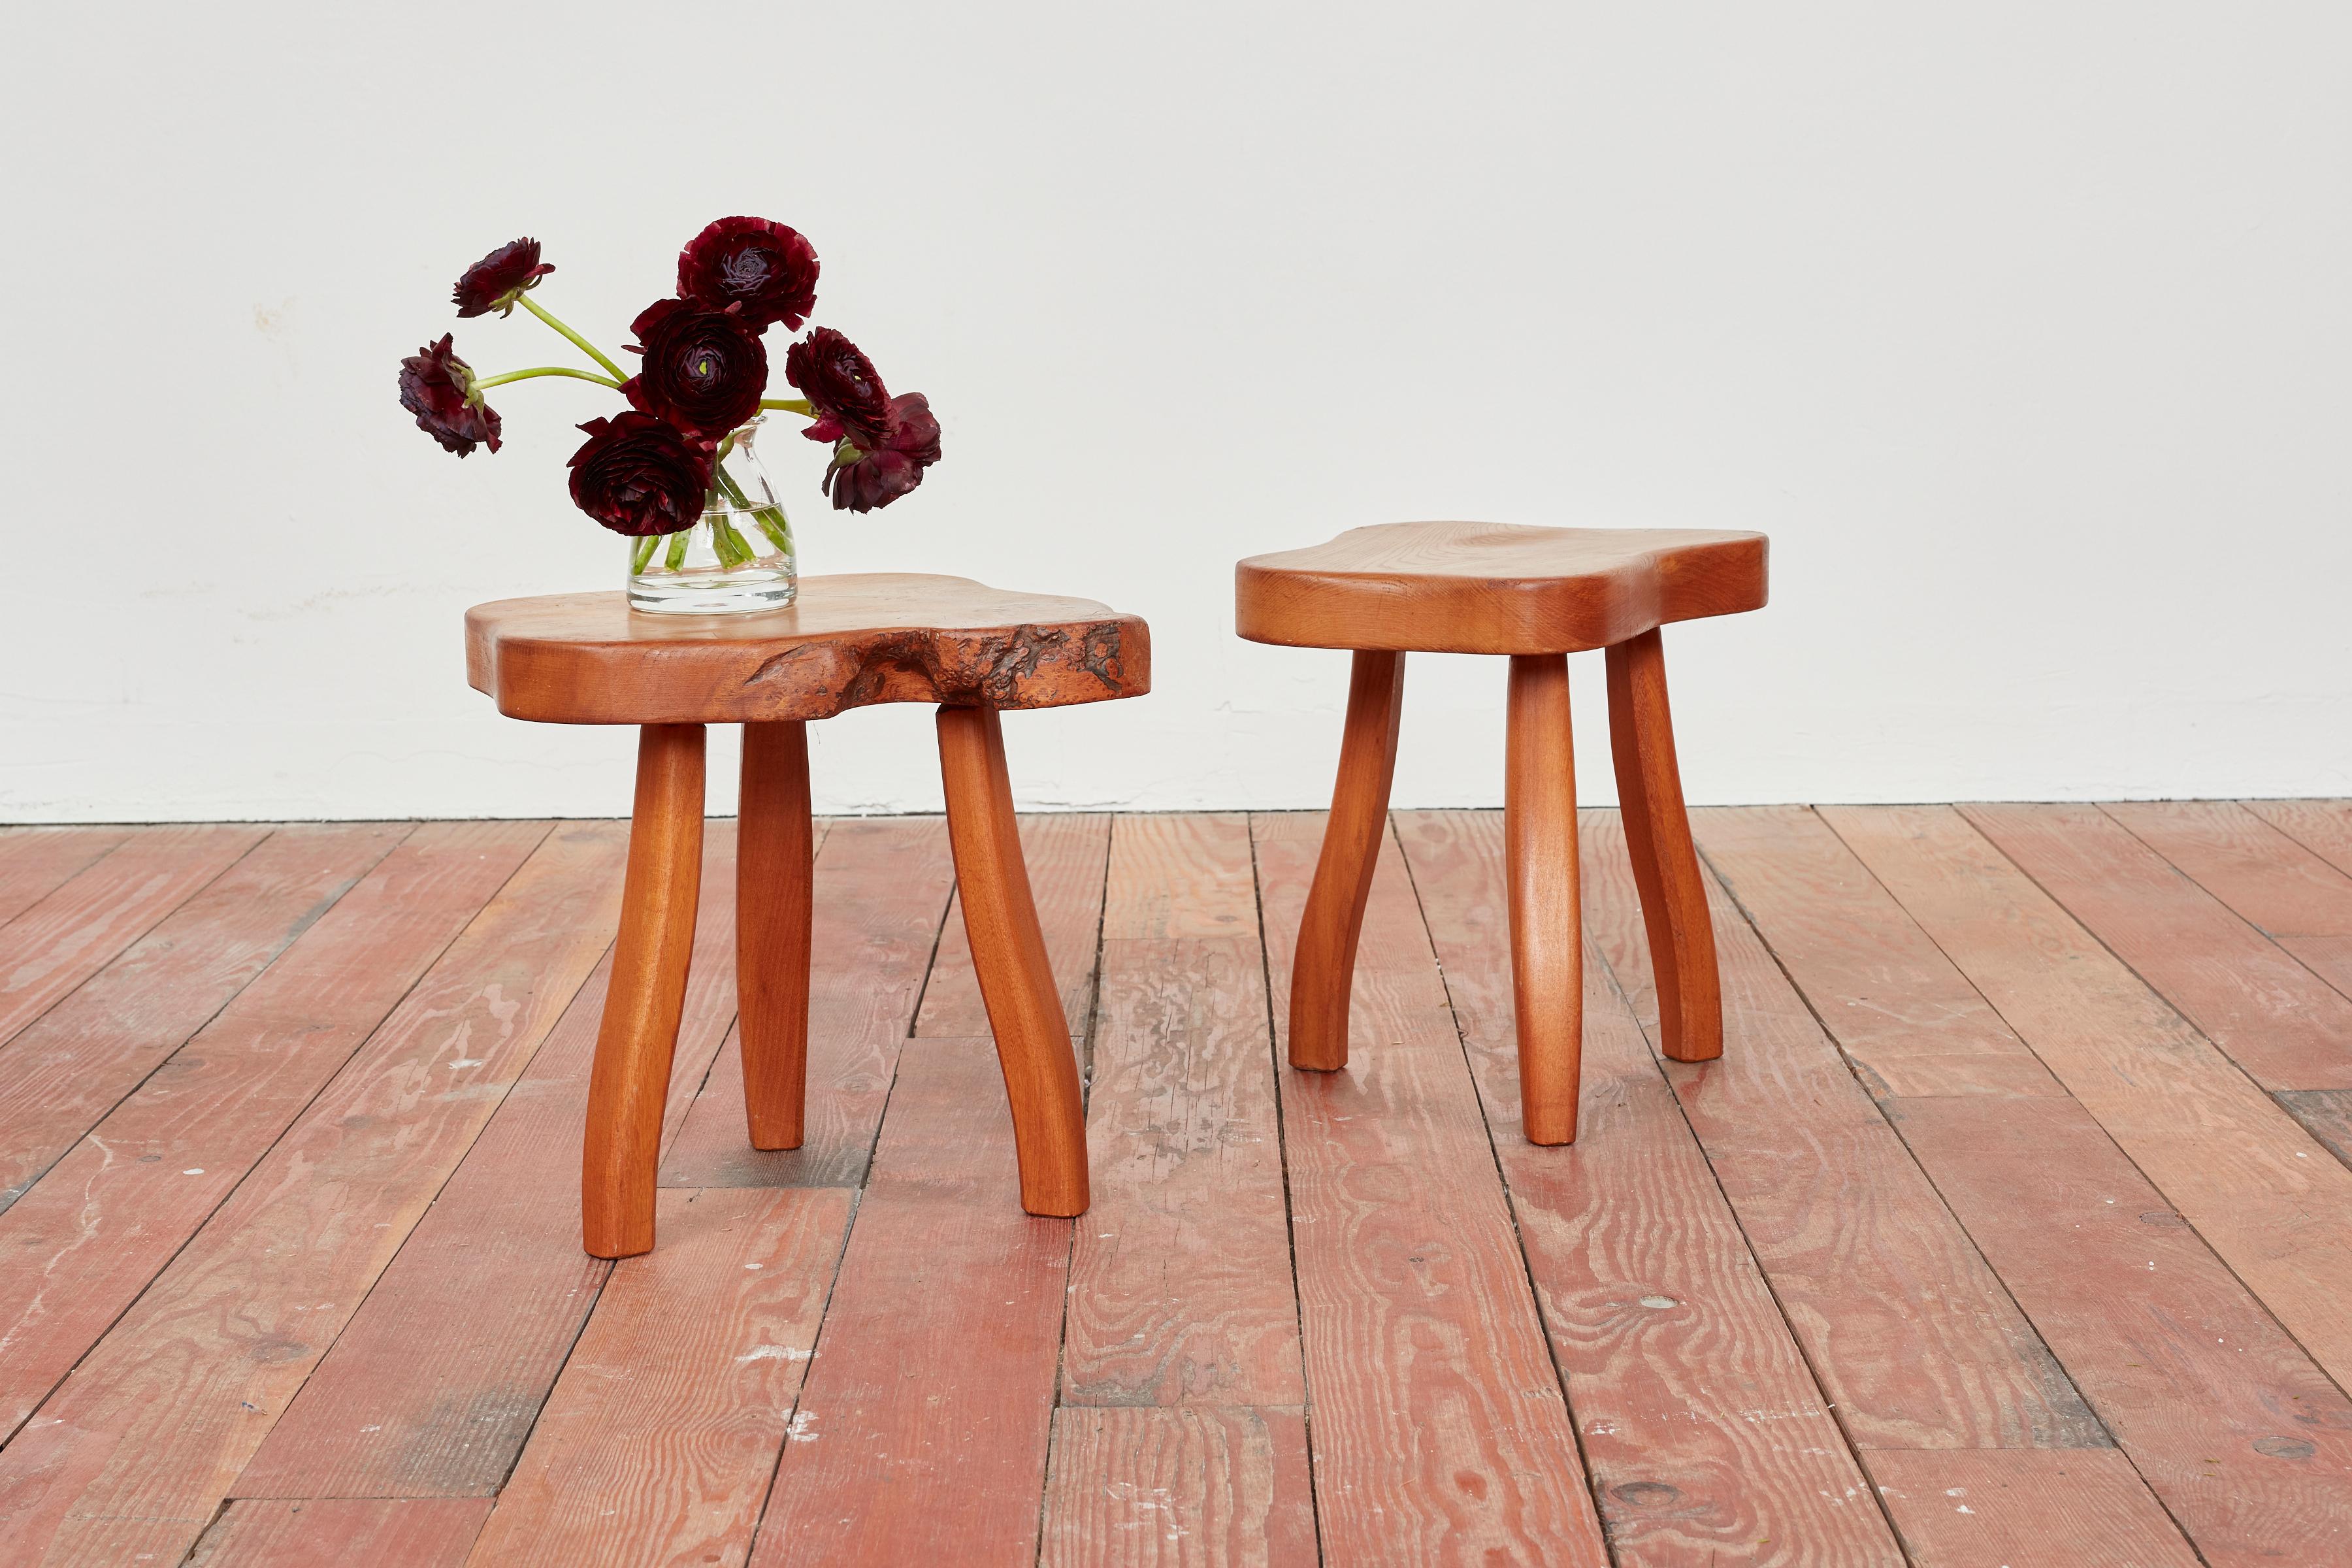 Pair of French Elm tripod stools 
Thick brutalist wood with wonderful patina and raw edges
Priced individually.